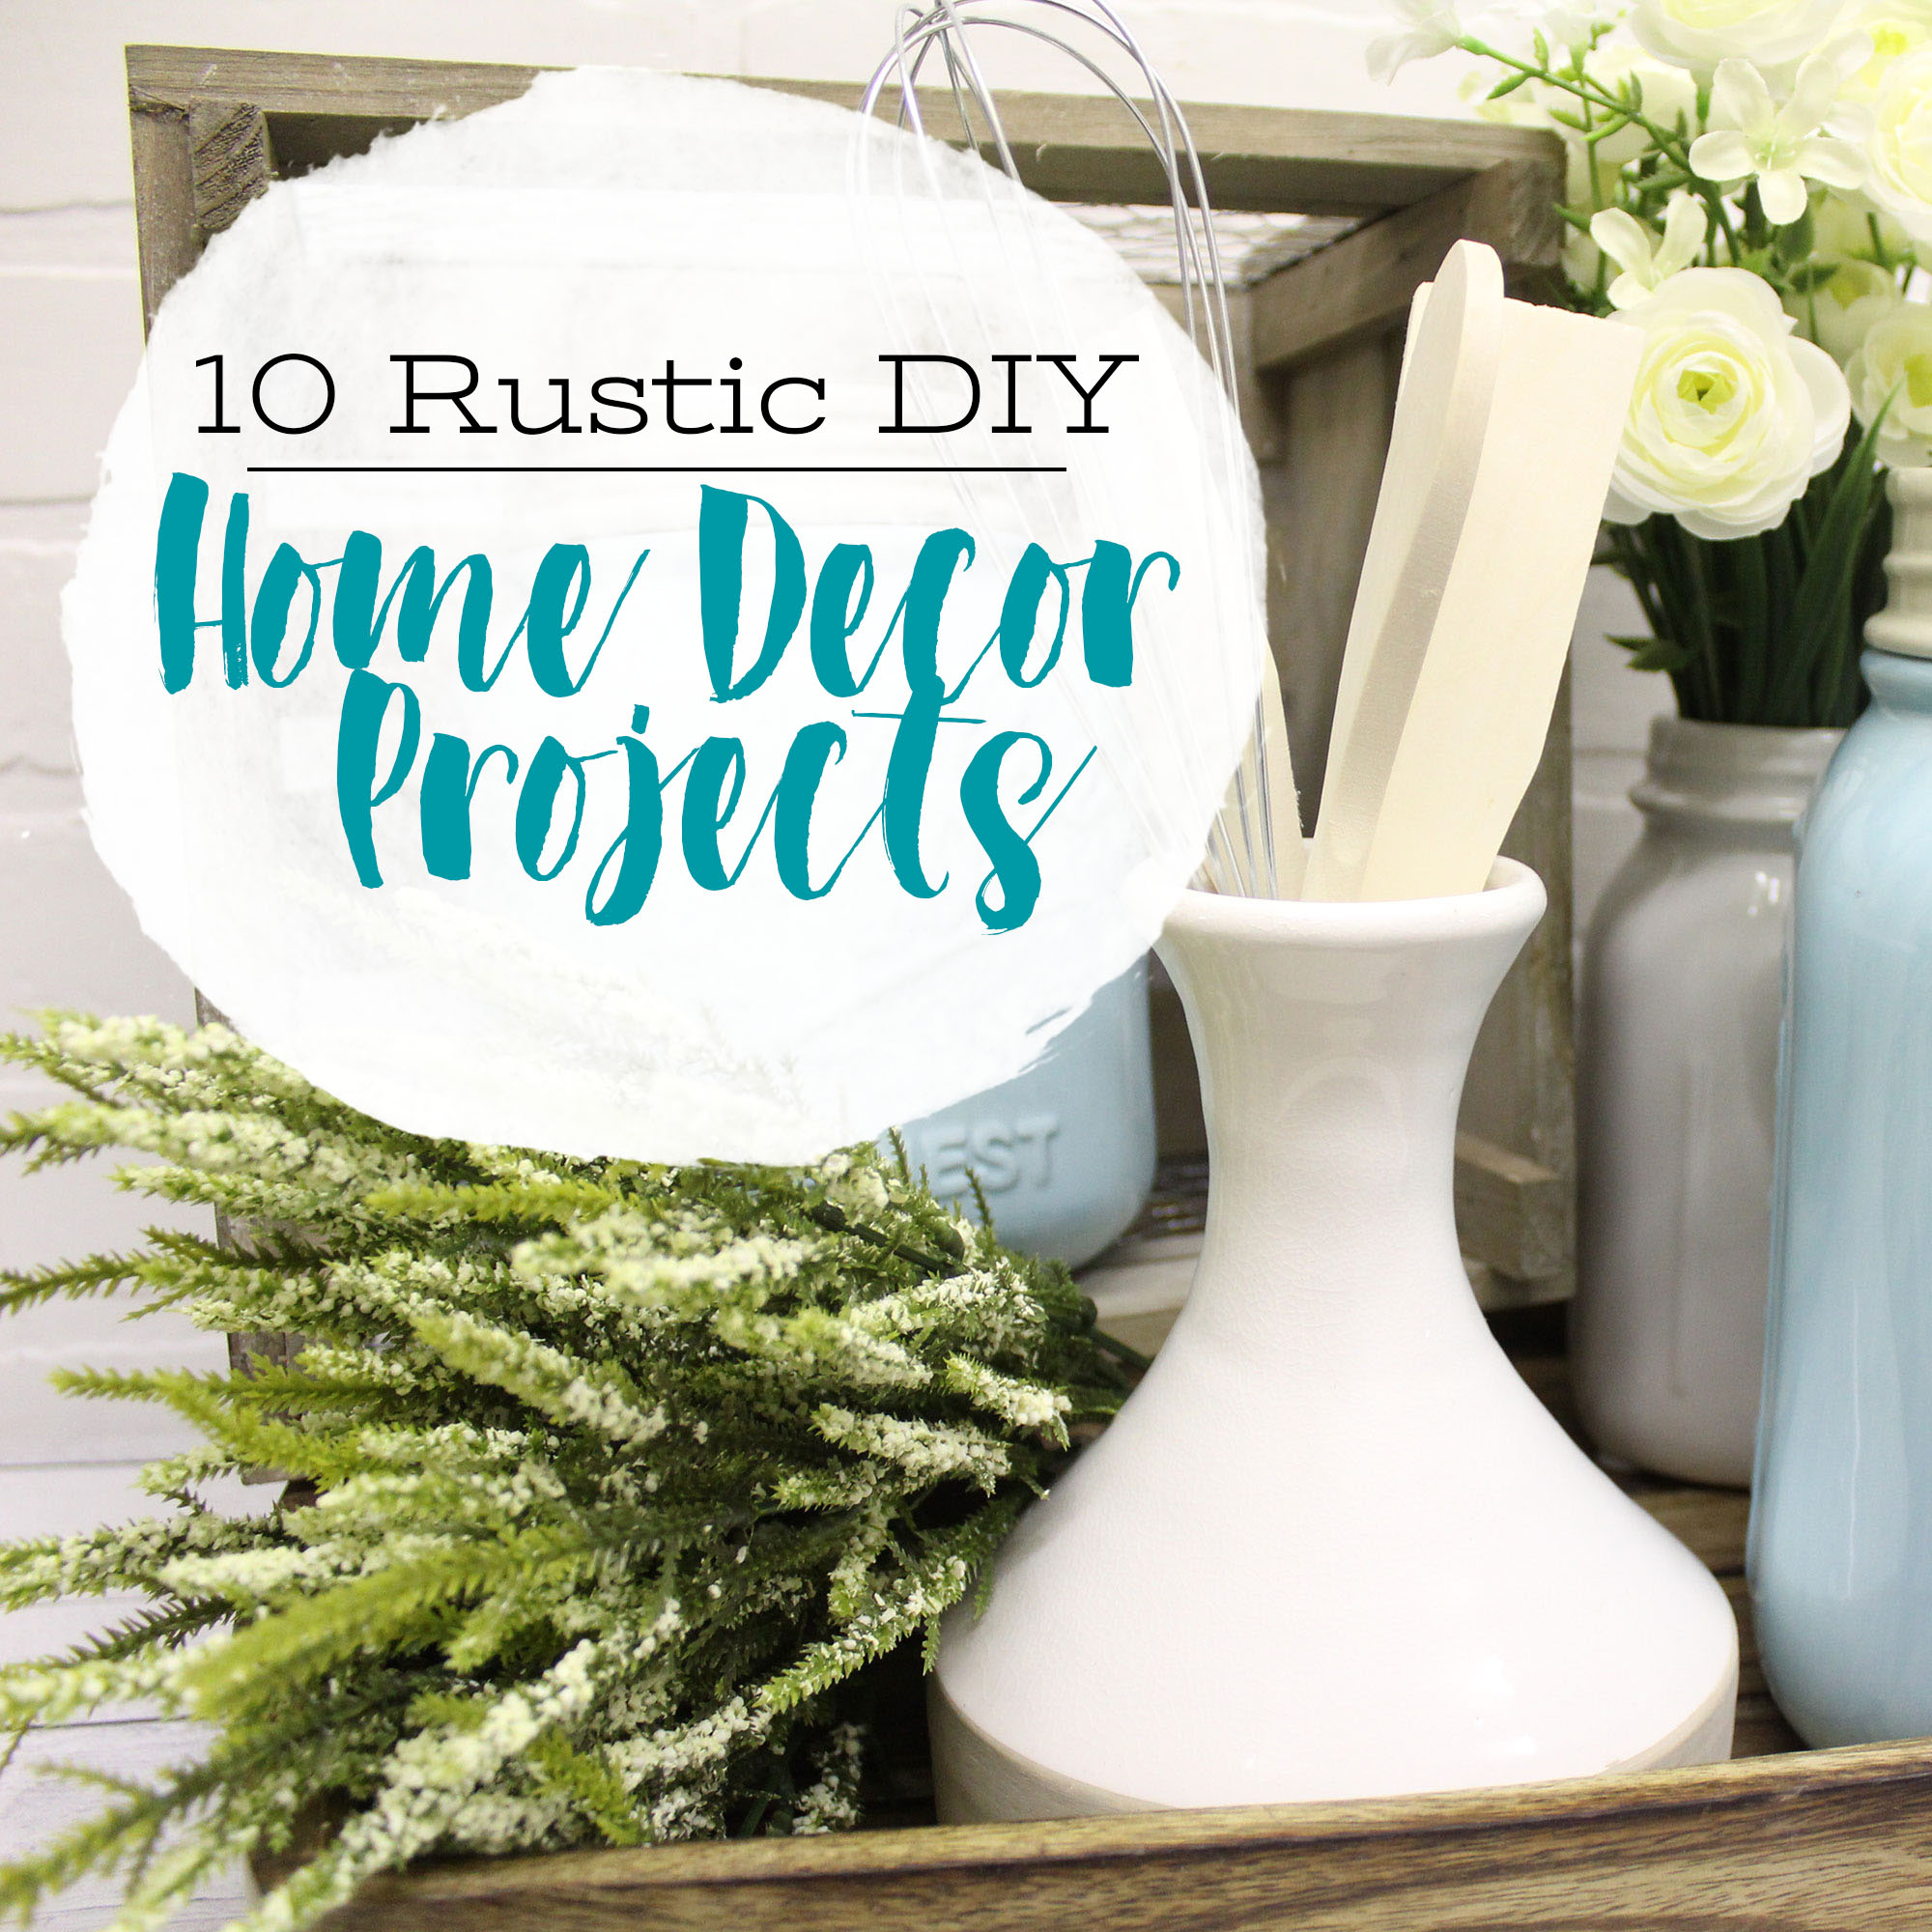 10 Rustic DIY Home Decor Projects